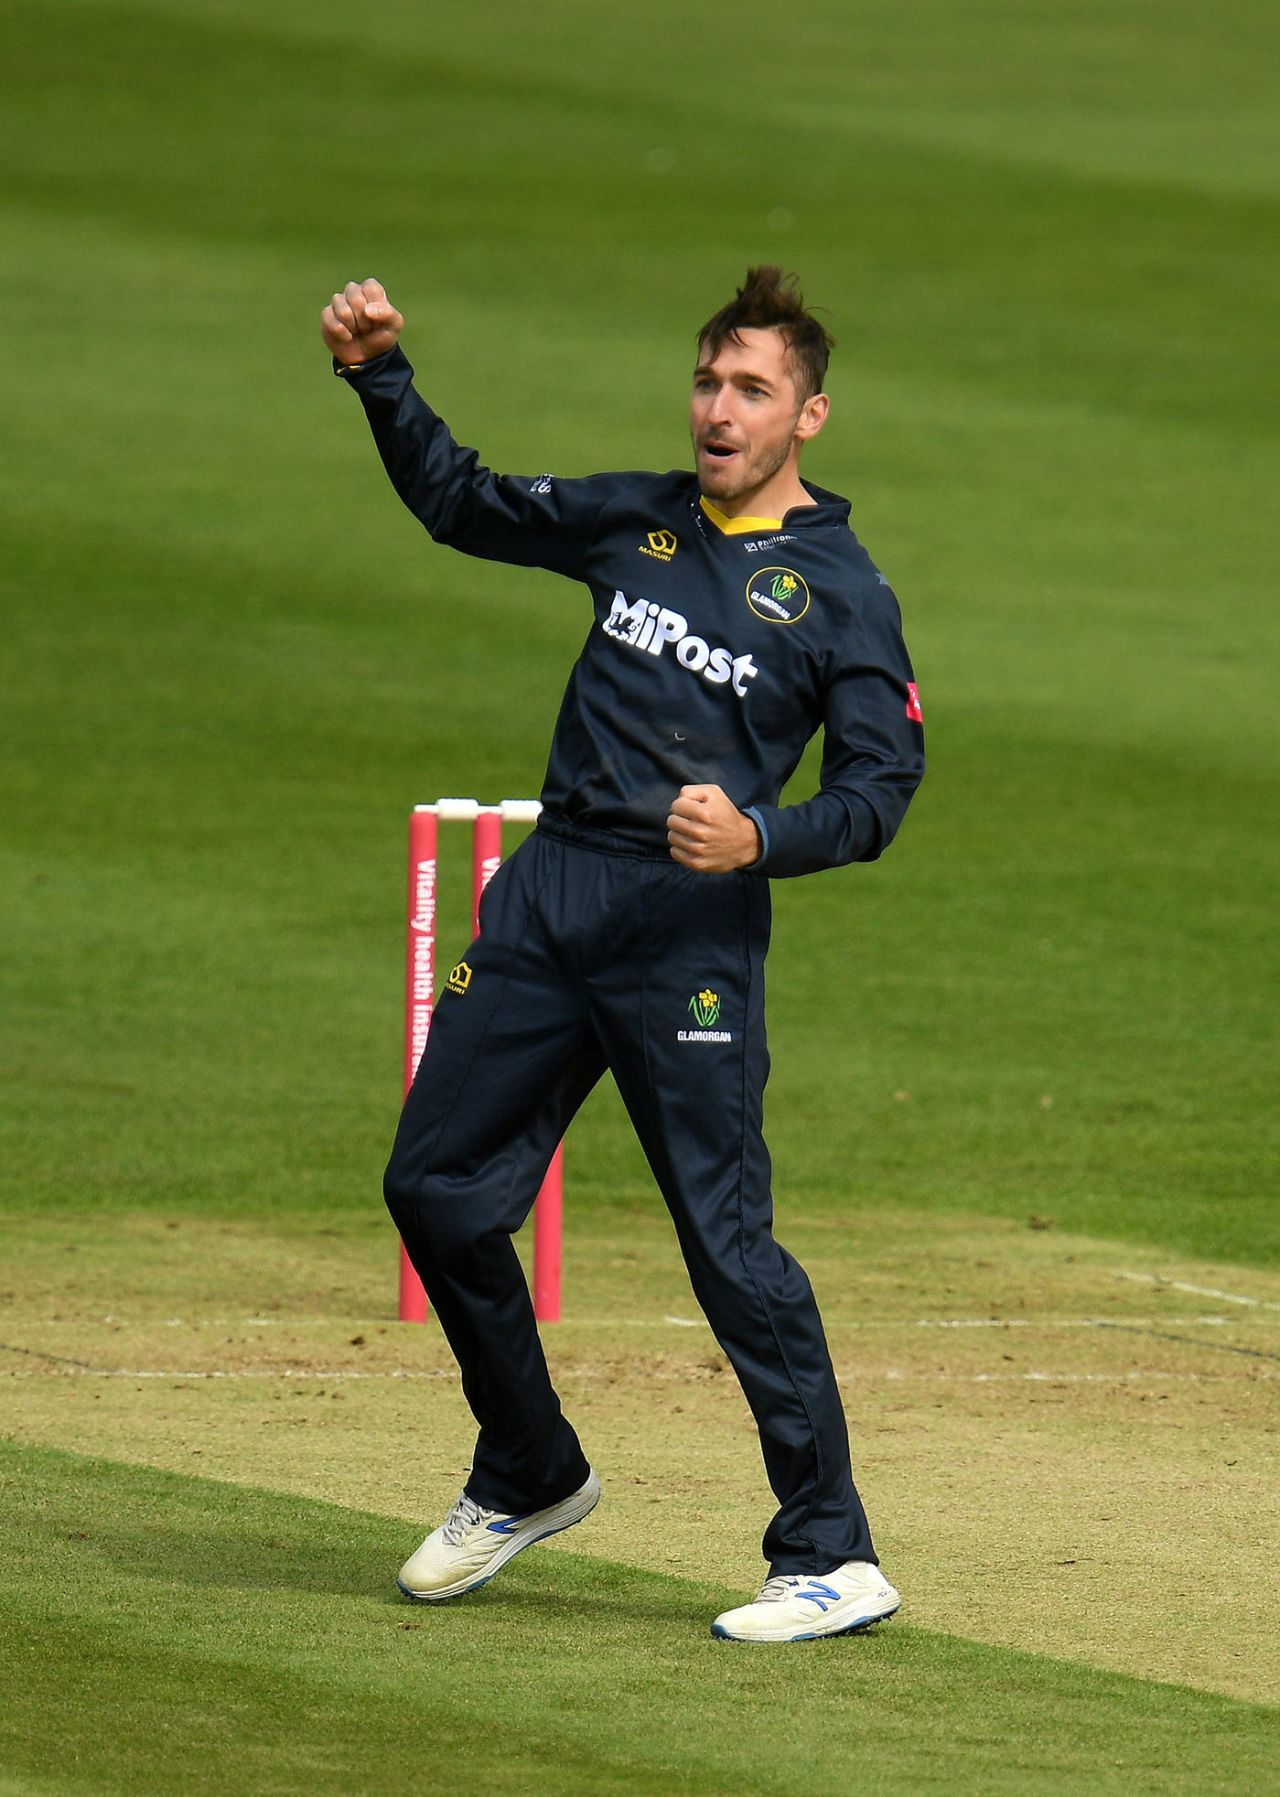 Andrew Salter starred with the ball, Gloucestershire v Glamorgan, Vitality Blast, Bristol, August 29, 2020